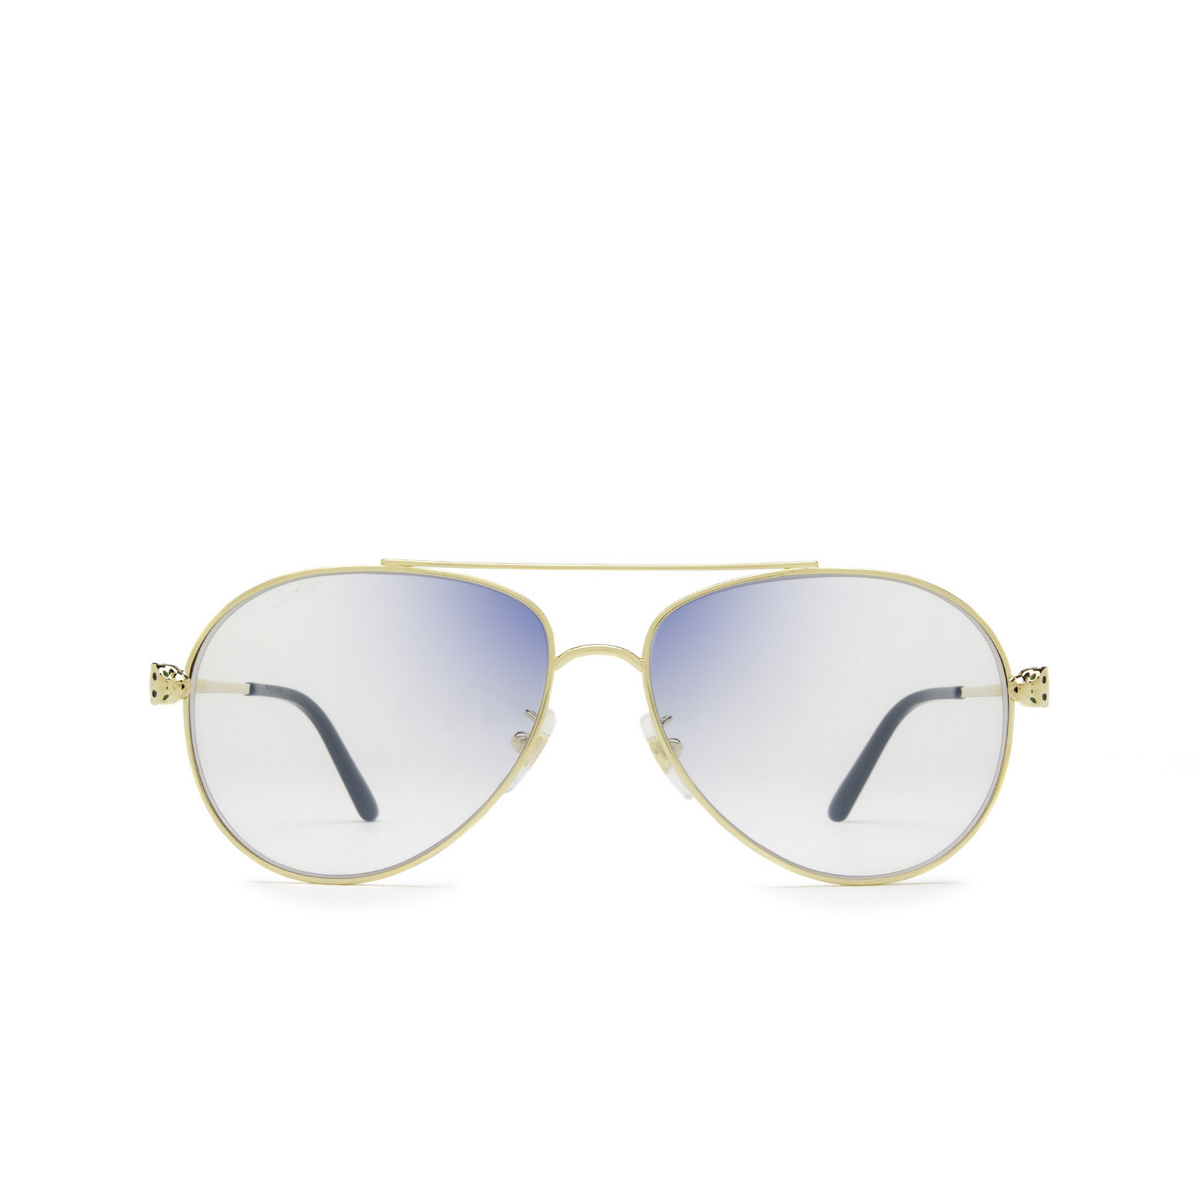 Cartier CT0233S Sunglasses 005 Gold - front view